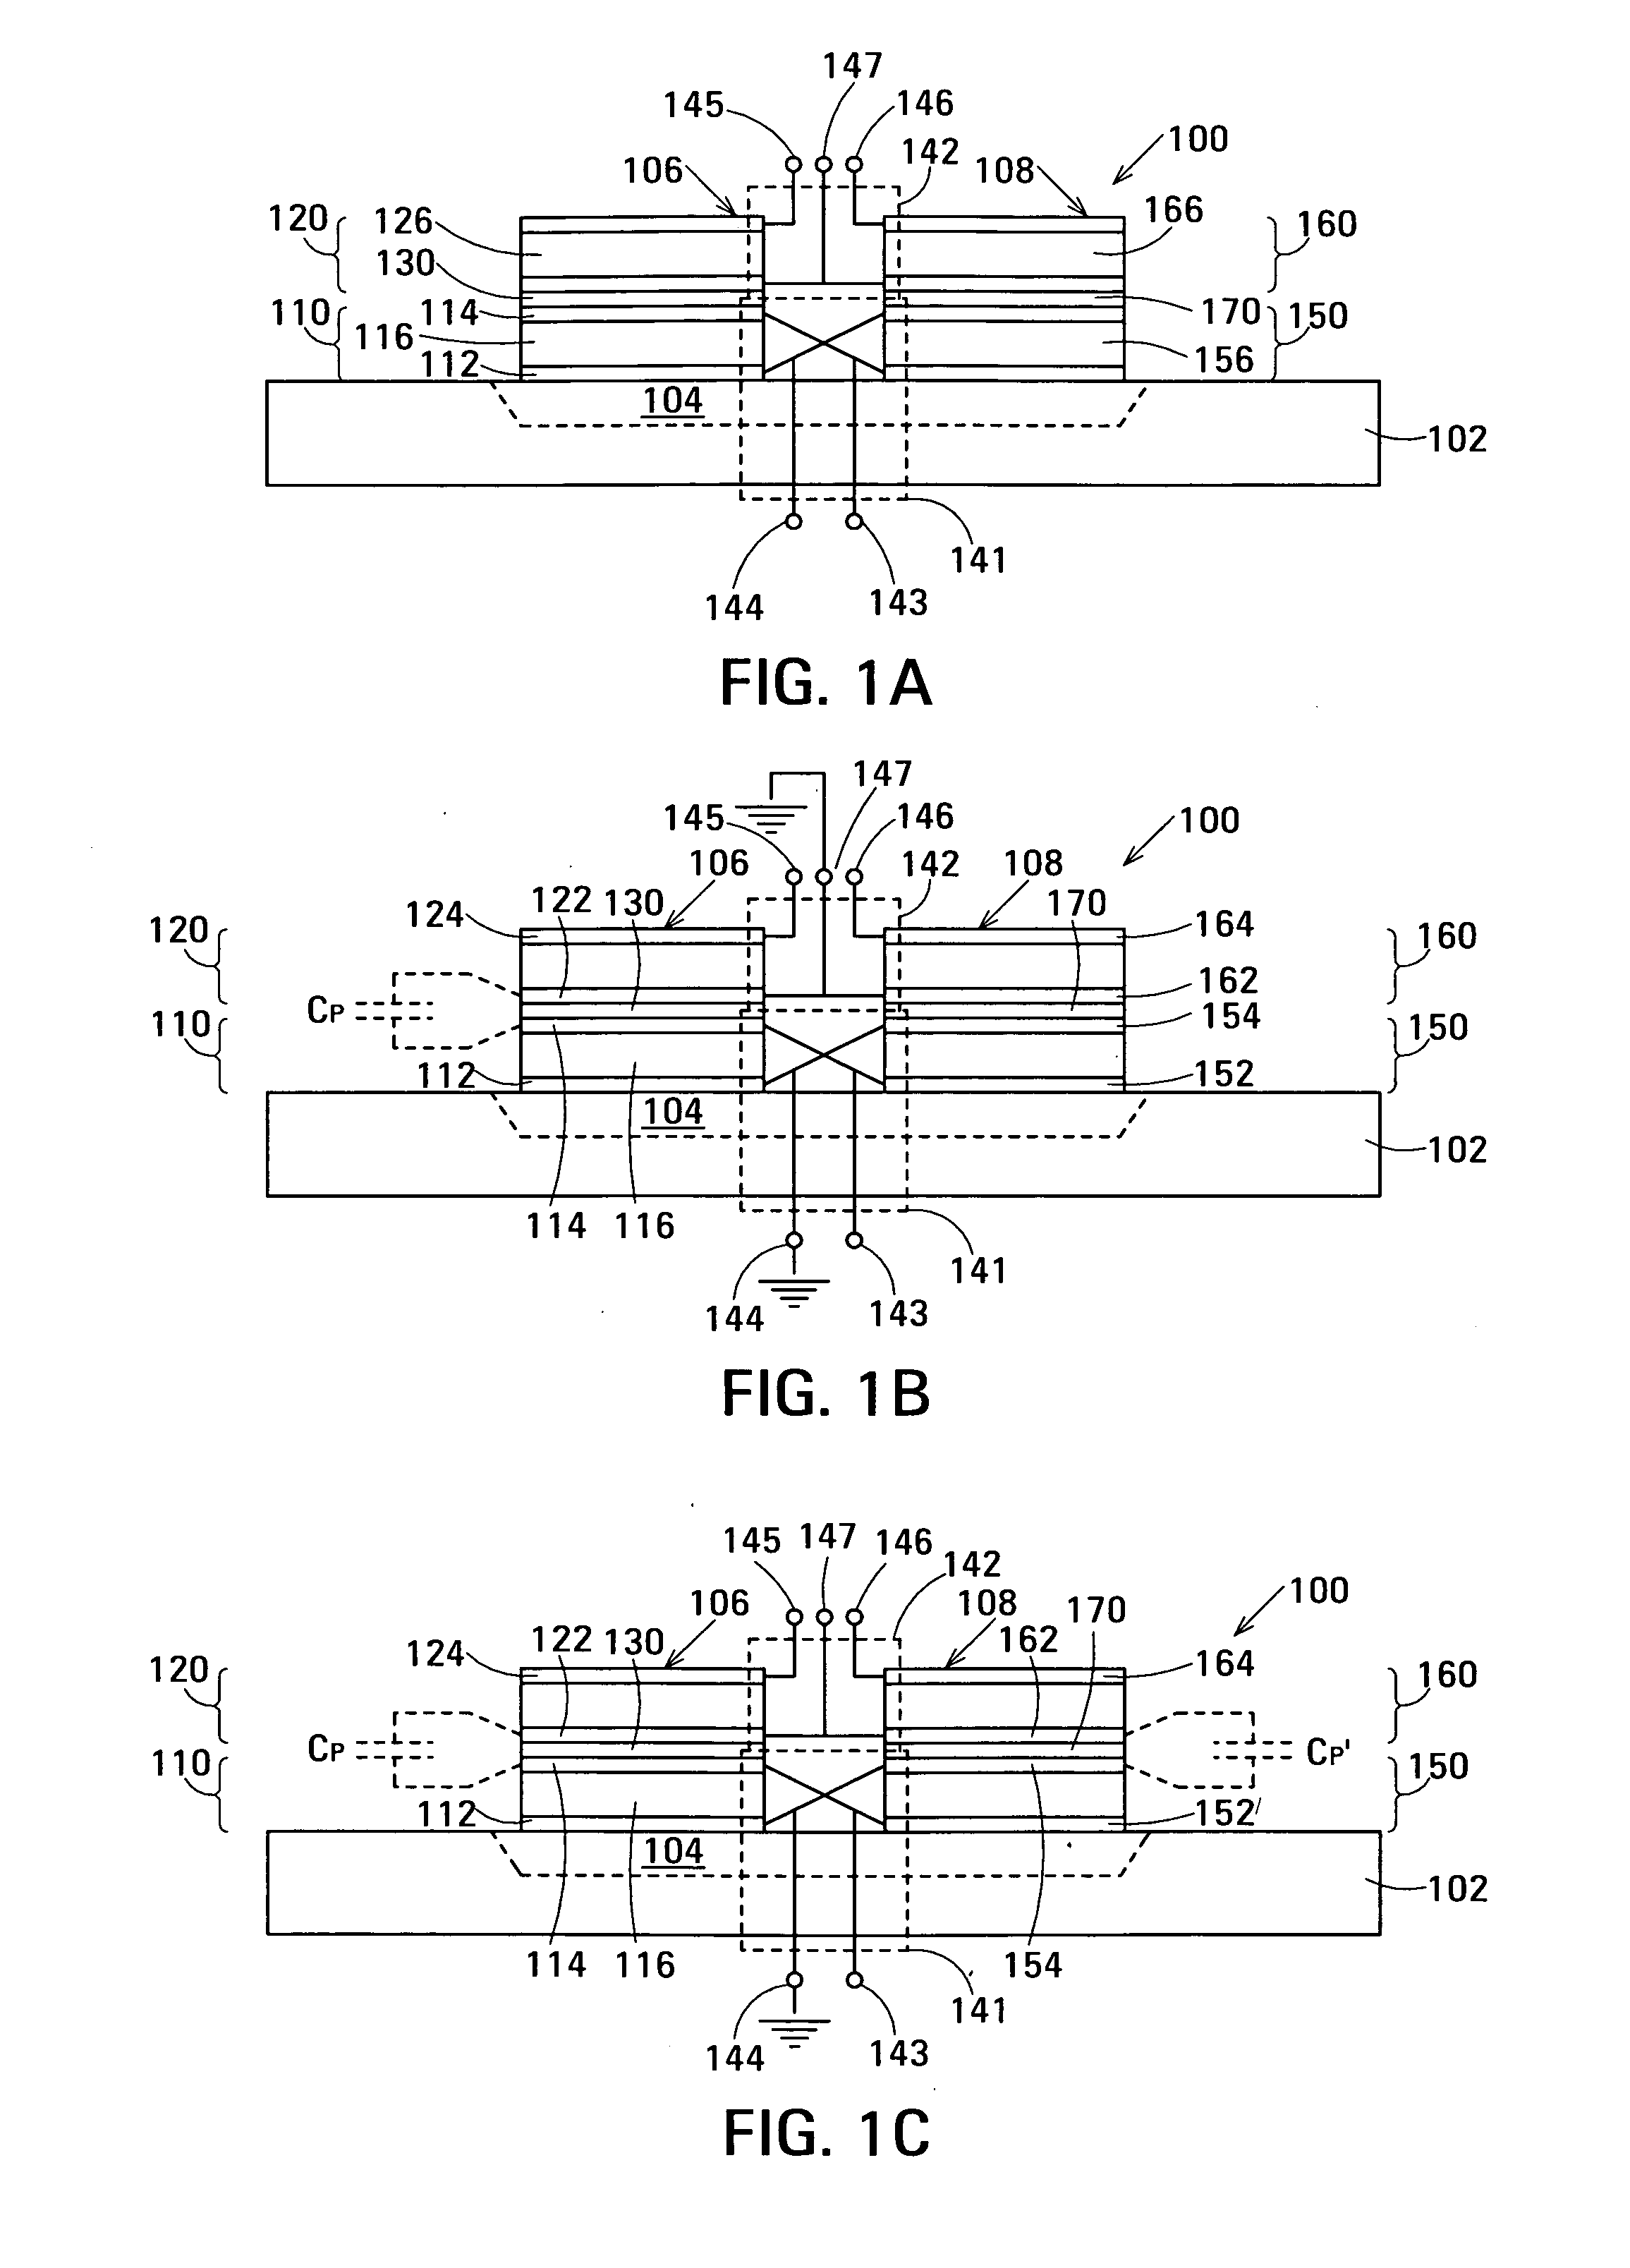 Film acoustically-coupled transformer with increased common mode rejection